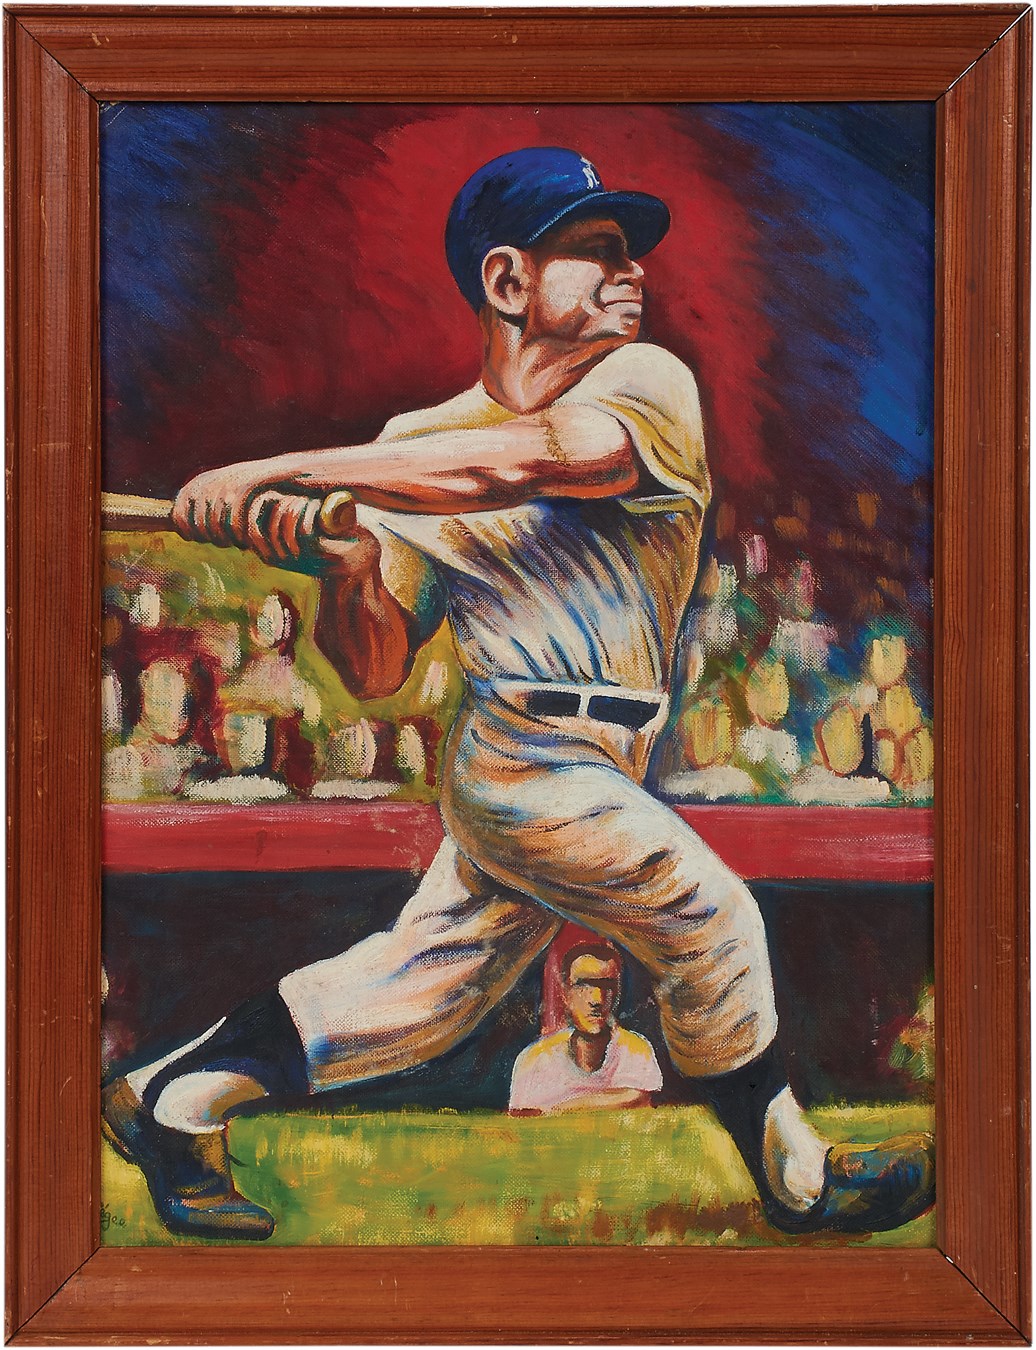 Exceptional 1964 Mickey Mantle Abstract Oil on Canvas by Pat Young